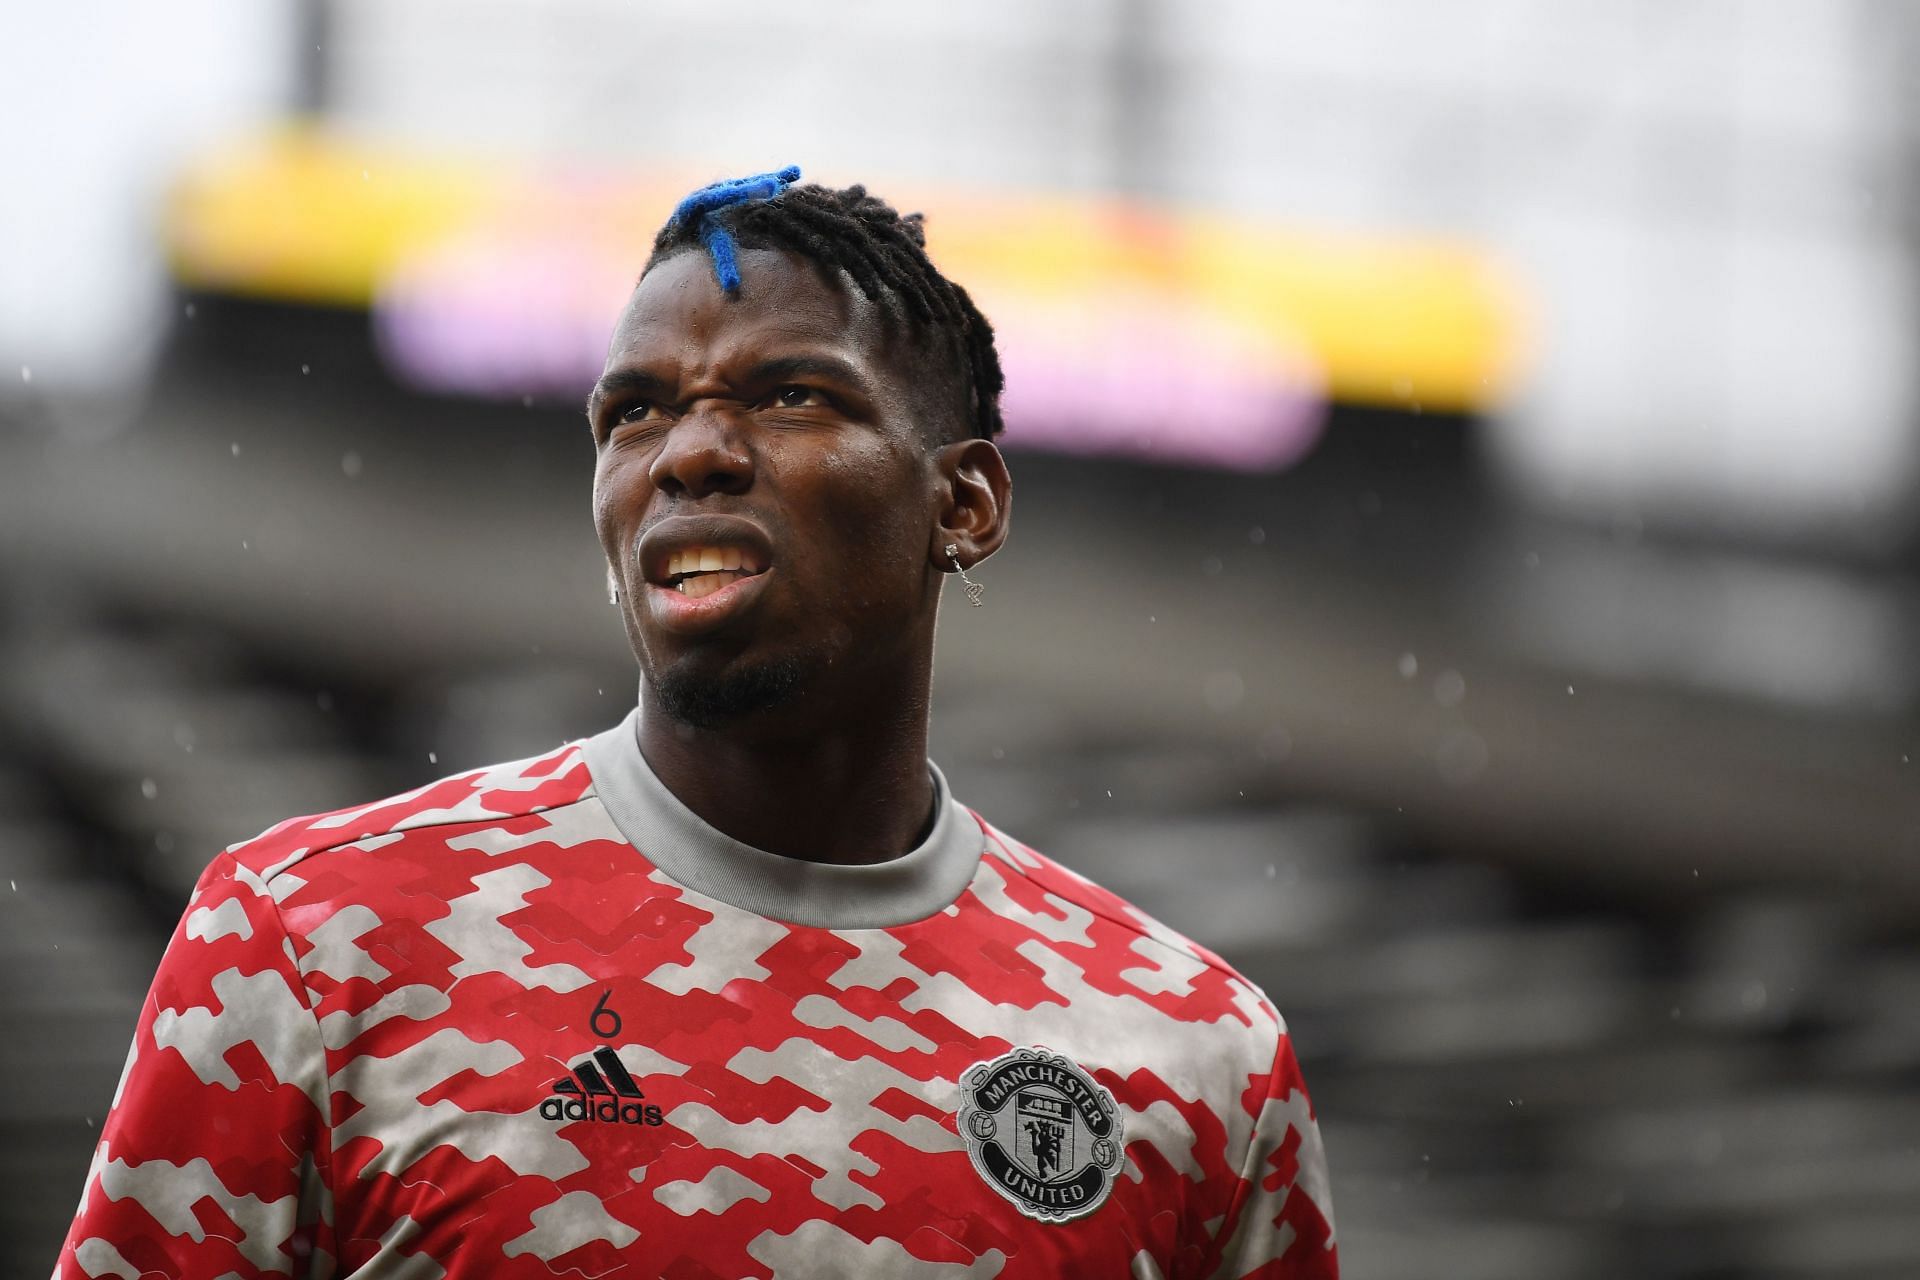 Paul Ince has criticised Manchester United for offering Paul Pogba a new contract with a huge salary.